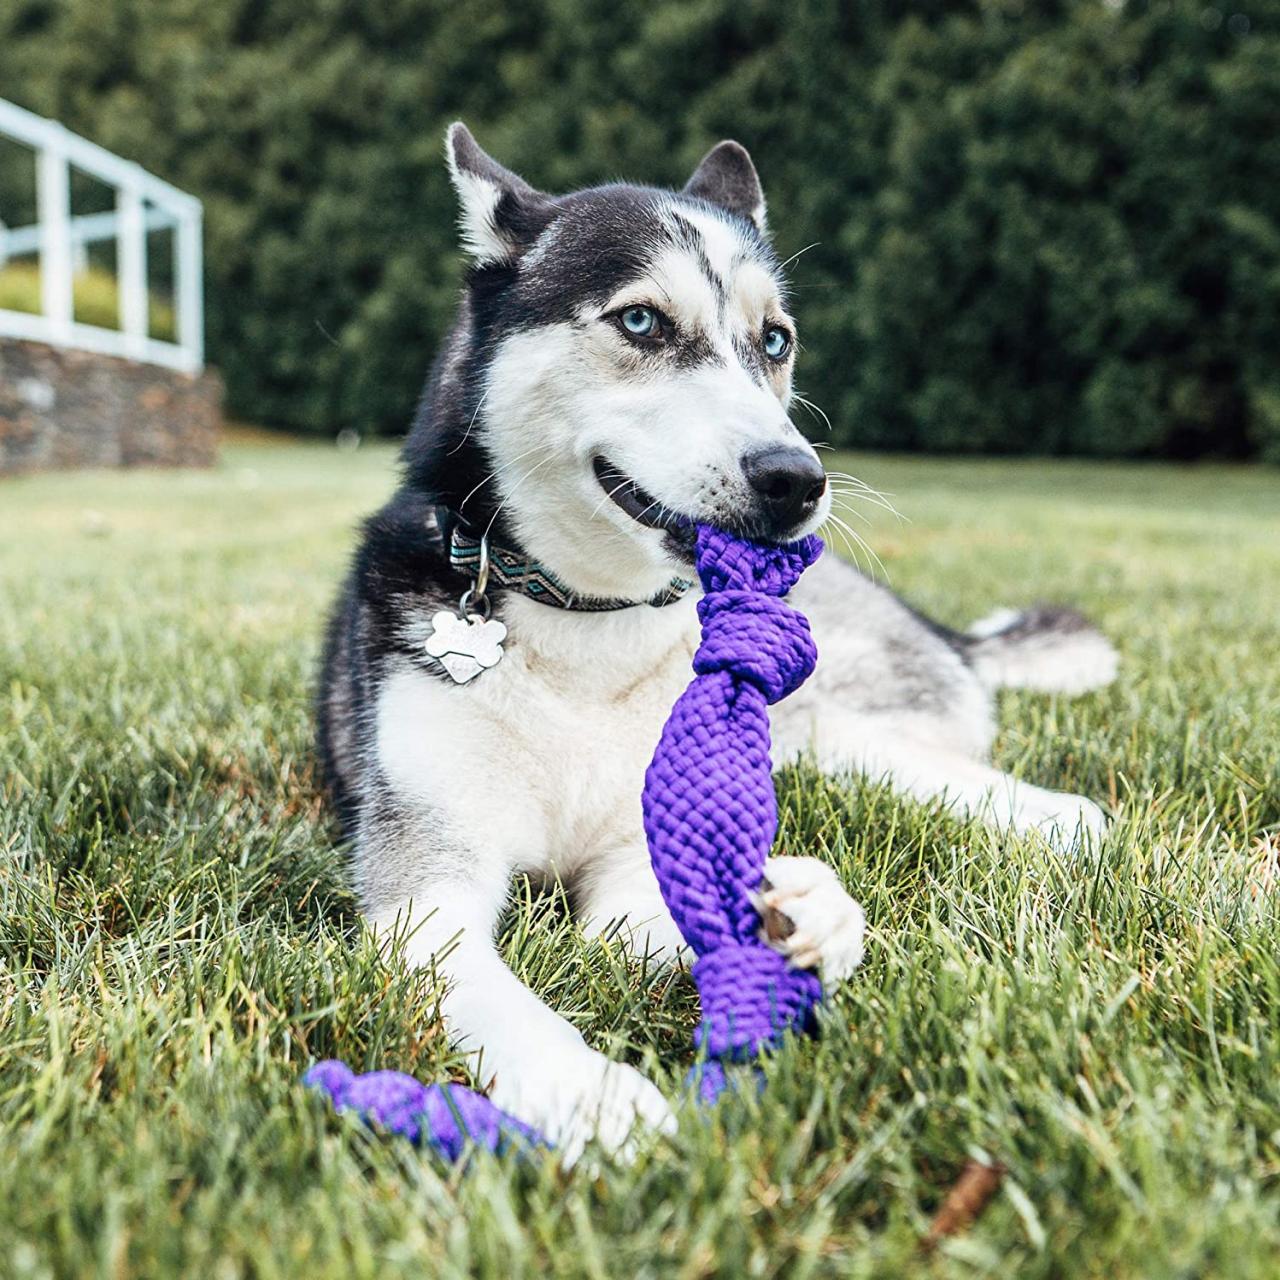 https://hgtvhome.sndimg.com/content/dam/images/hgtv/products/2021/7/15/1/rx_amazon_playology-silver-dental-rope-dog-toy-for-seniors.jpeg.rend.hgtvcom.1280.1280.suffix/1626384347753.jpeg